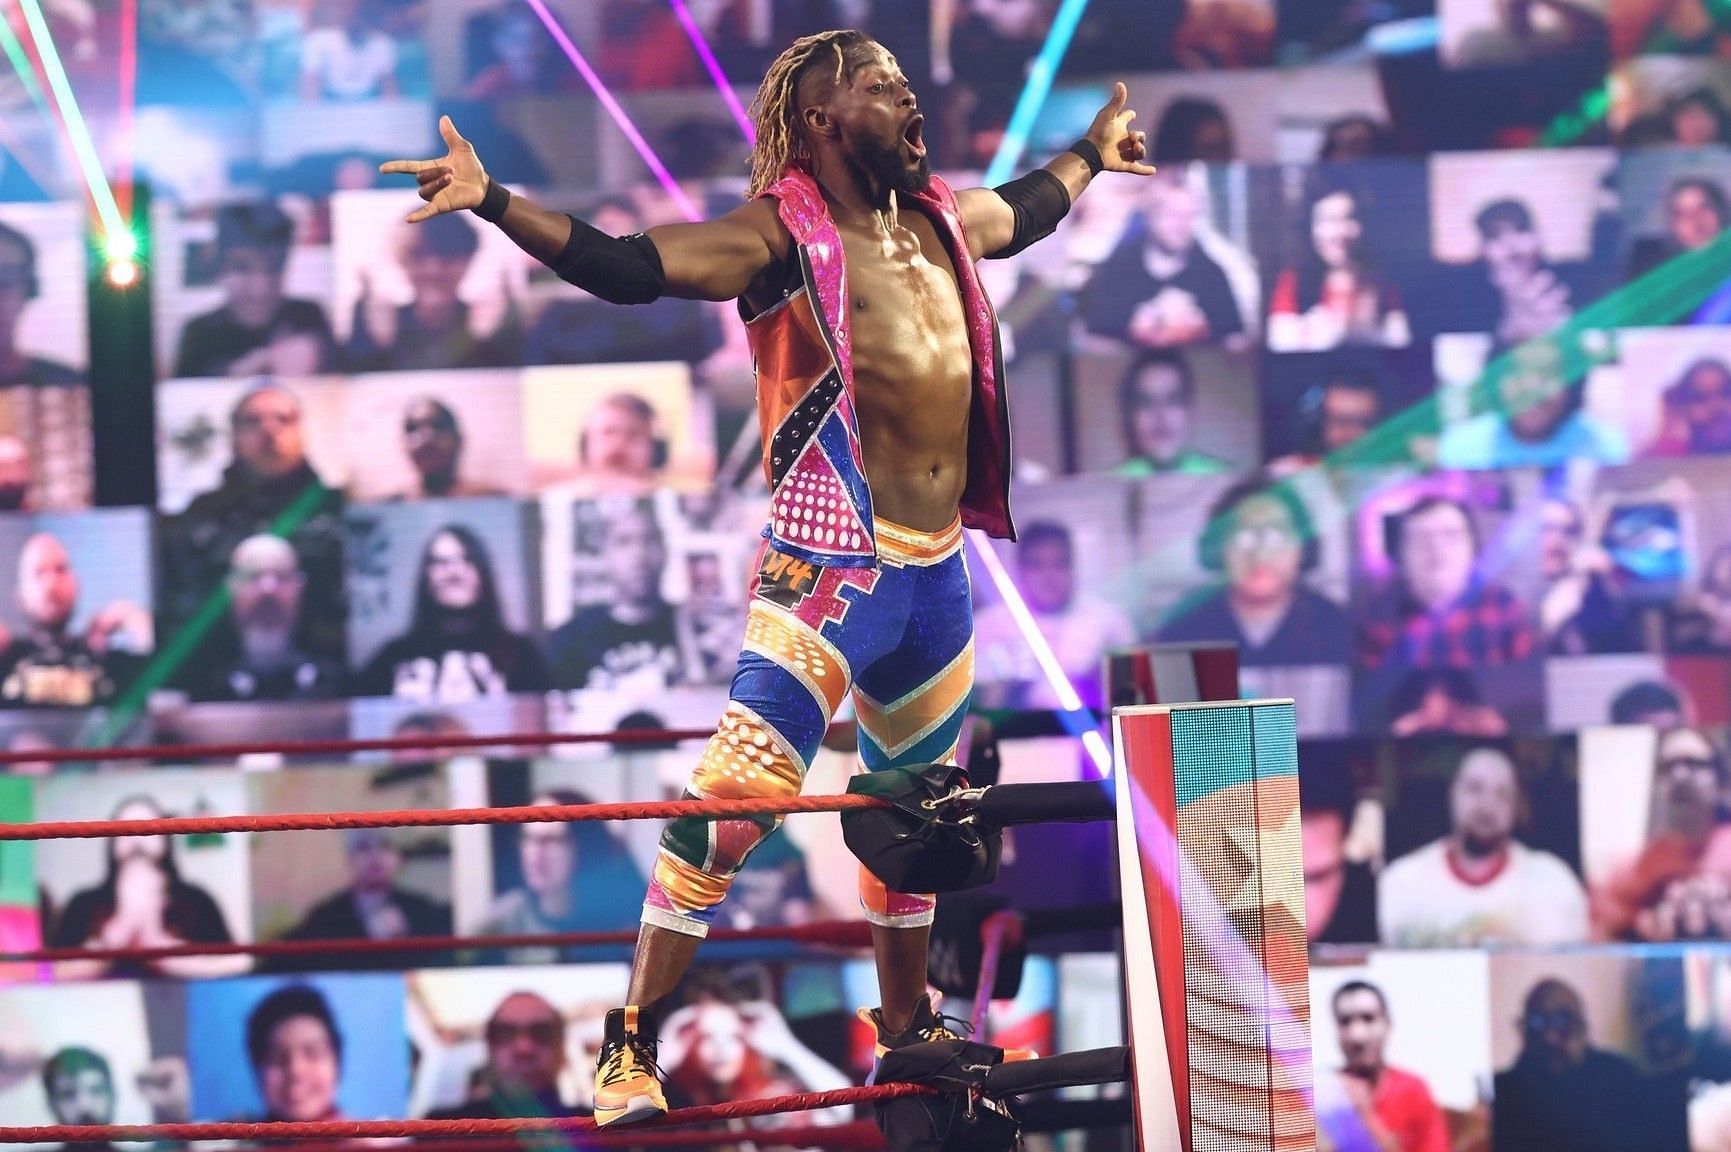 Kofi Kingston has proven he can rise to any occasion!